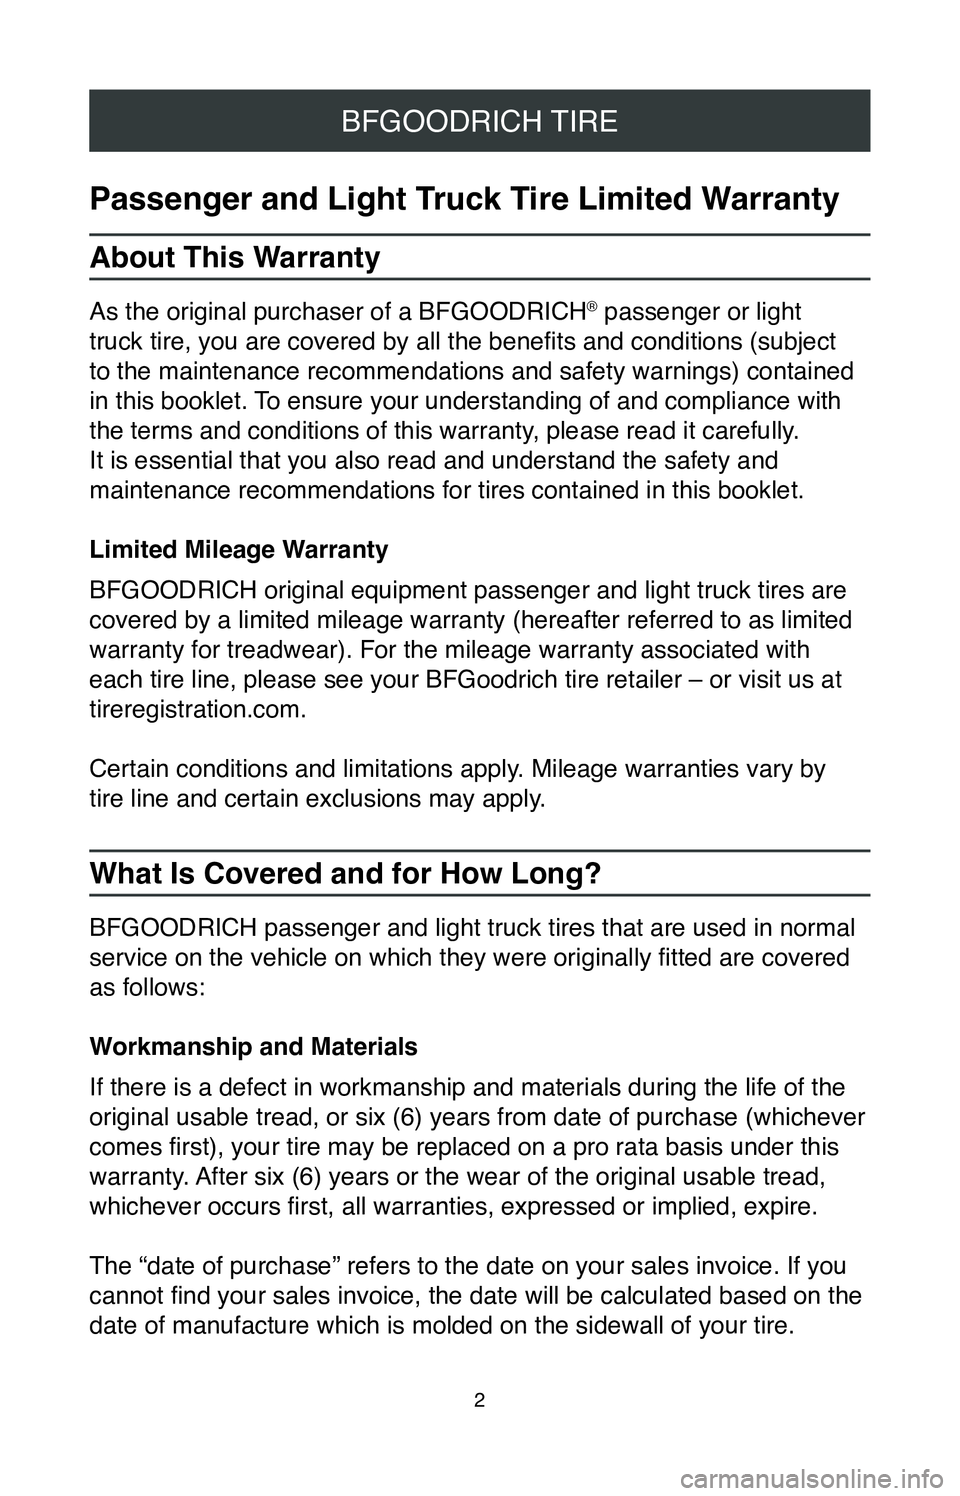 TOYOTA LAND CRUISER 2020  Warranties & Maintenance Guides (in English) 2
BFGOODRICH TIRE
Passenger and Light Truck Tire Limited Warranty
About This Warranty
As the original purchaser of a BFGOODRICH® passenger or light 
truck tire, you are covered by all the benefits an